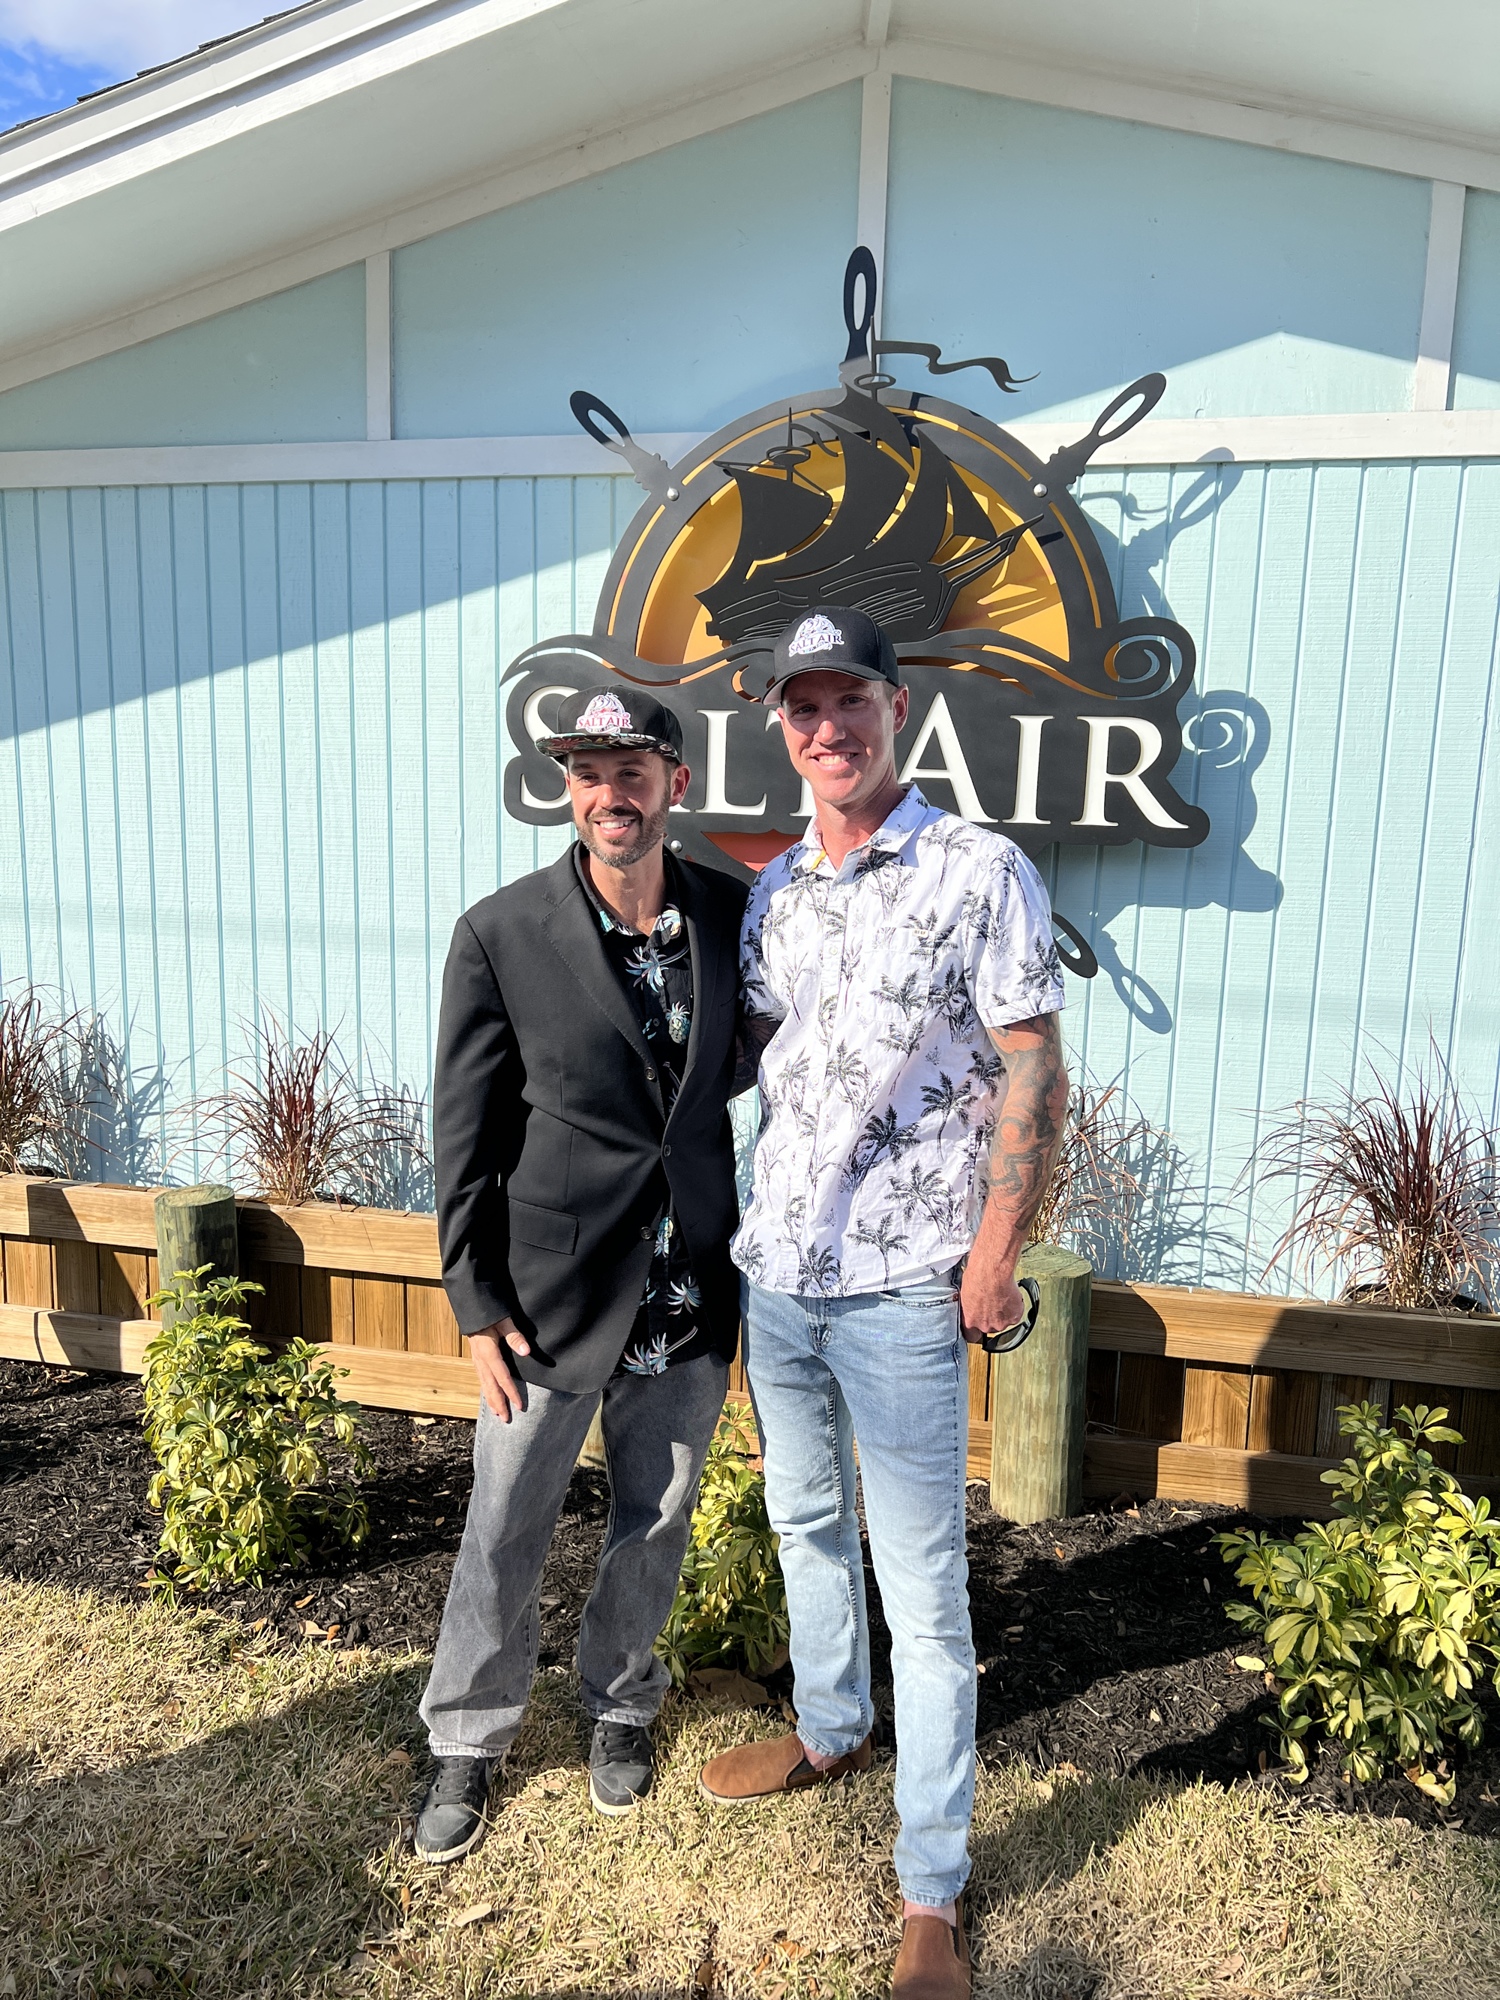 Curtis DeWitt, left, and his business partner, Kyle Stucki, purchased the Salt Air Motel, transforming it into the Salt Air Inn & Suites in Atlantic Beach.